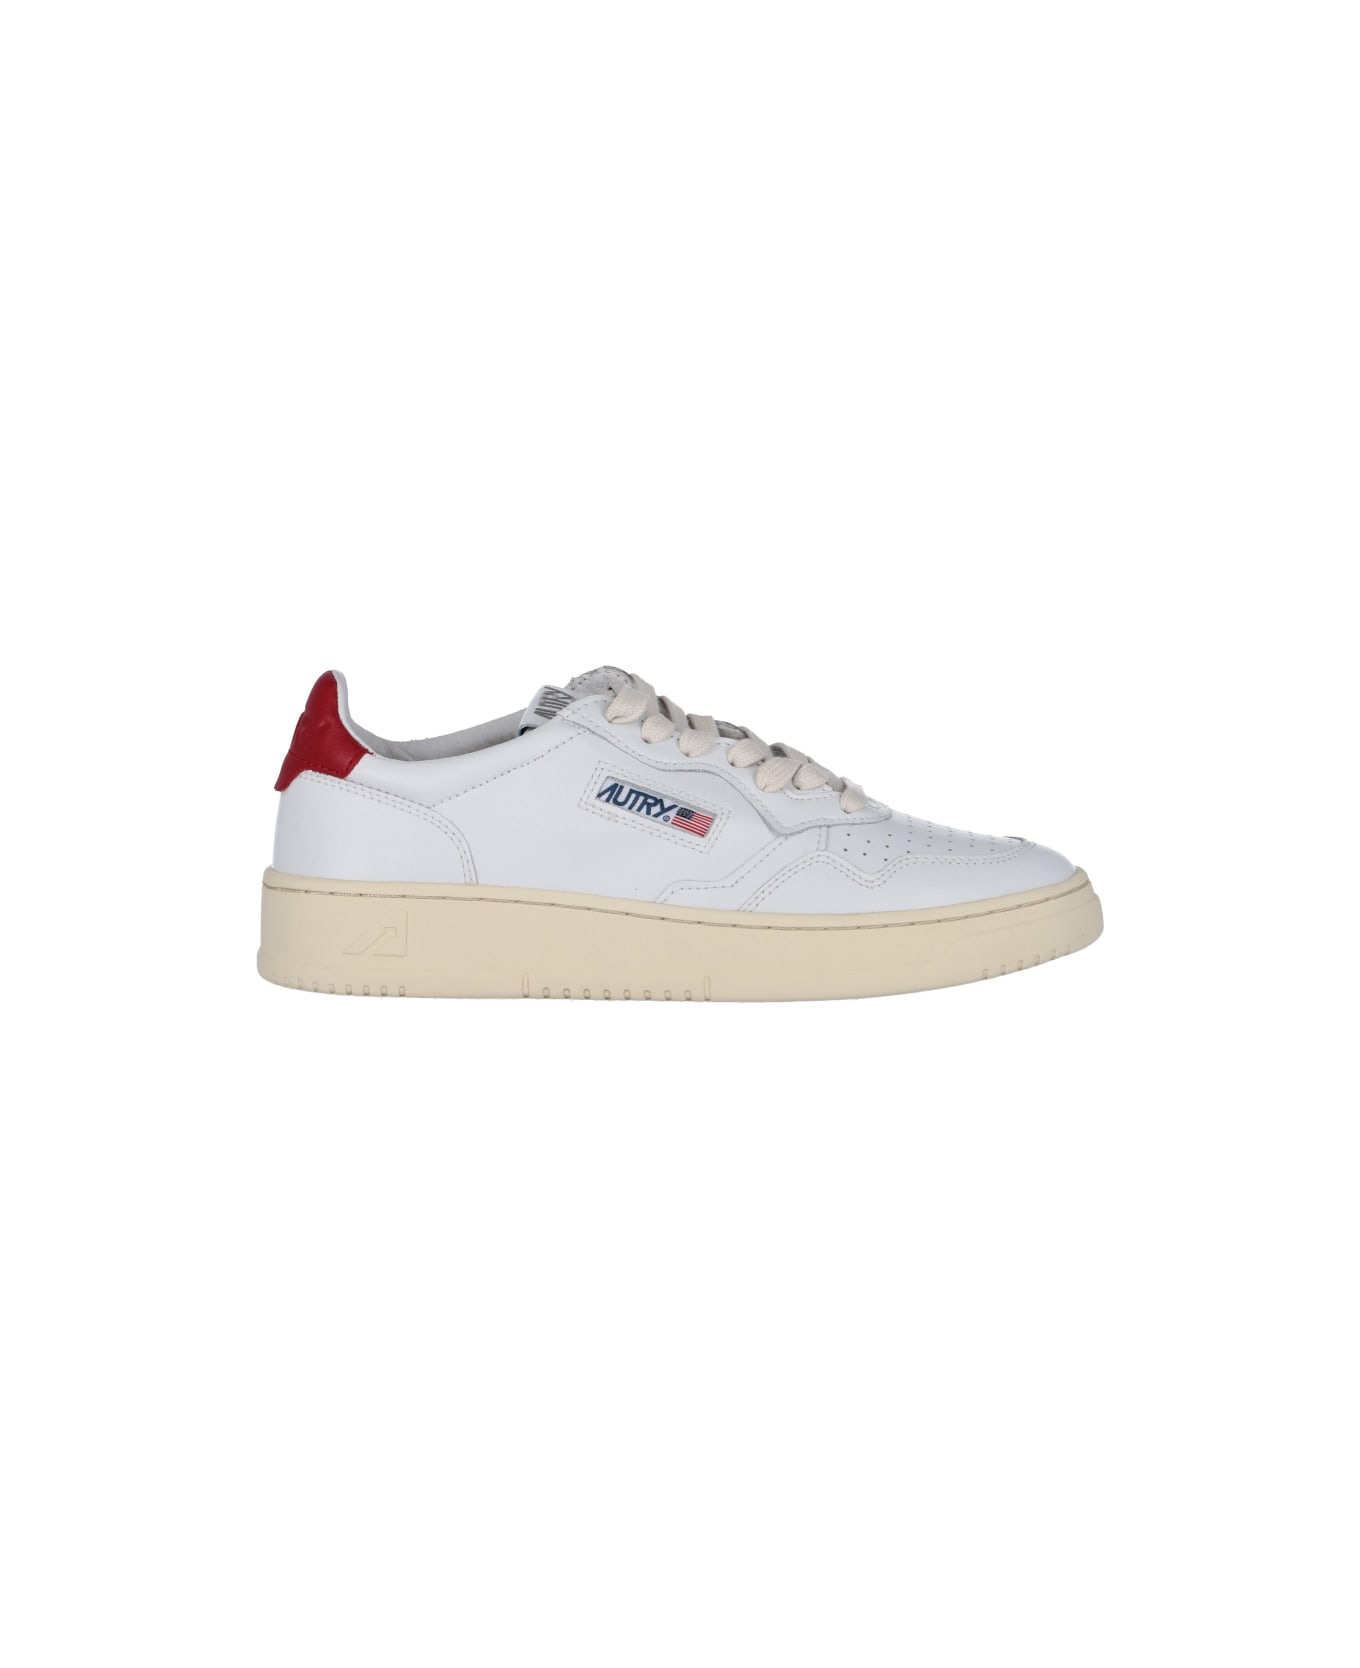 Autry 'medalist' Low Sneakers - Bianco/Rosso スニーカー